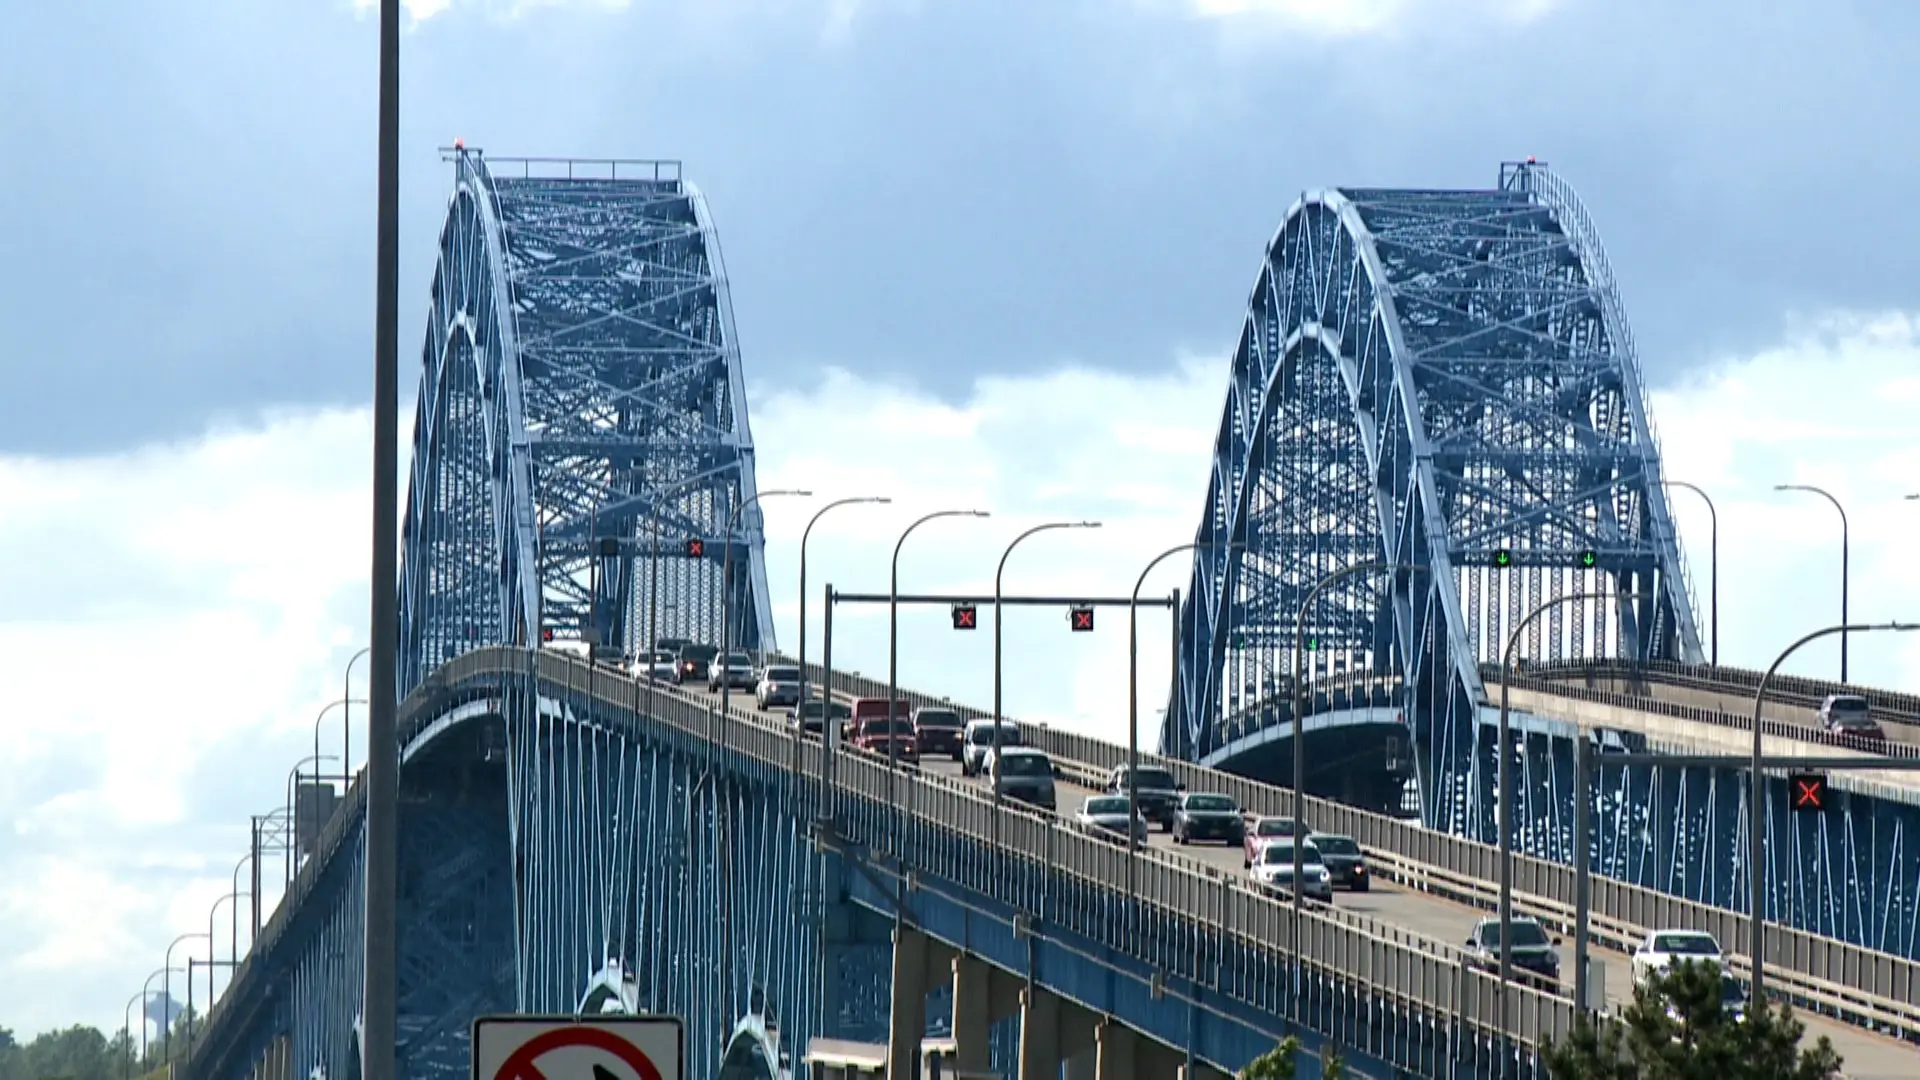 Cashless tolling to begin on Grand Island Crossings in New York